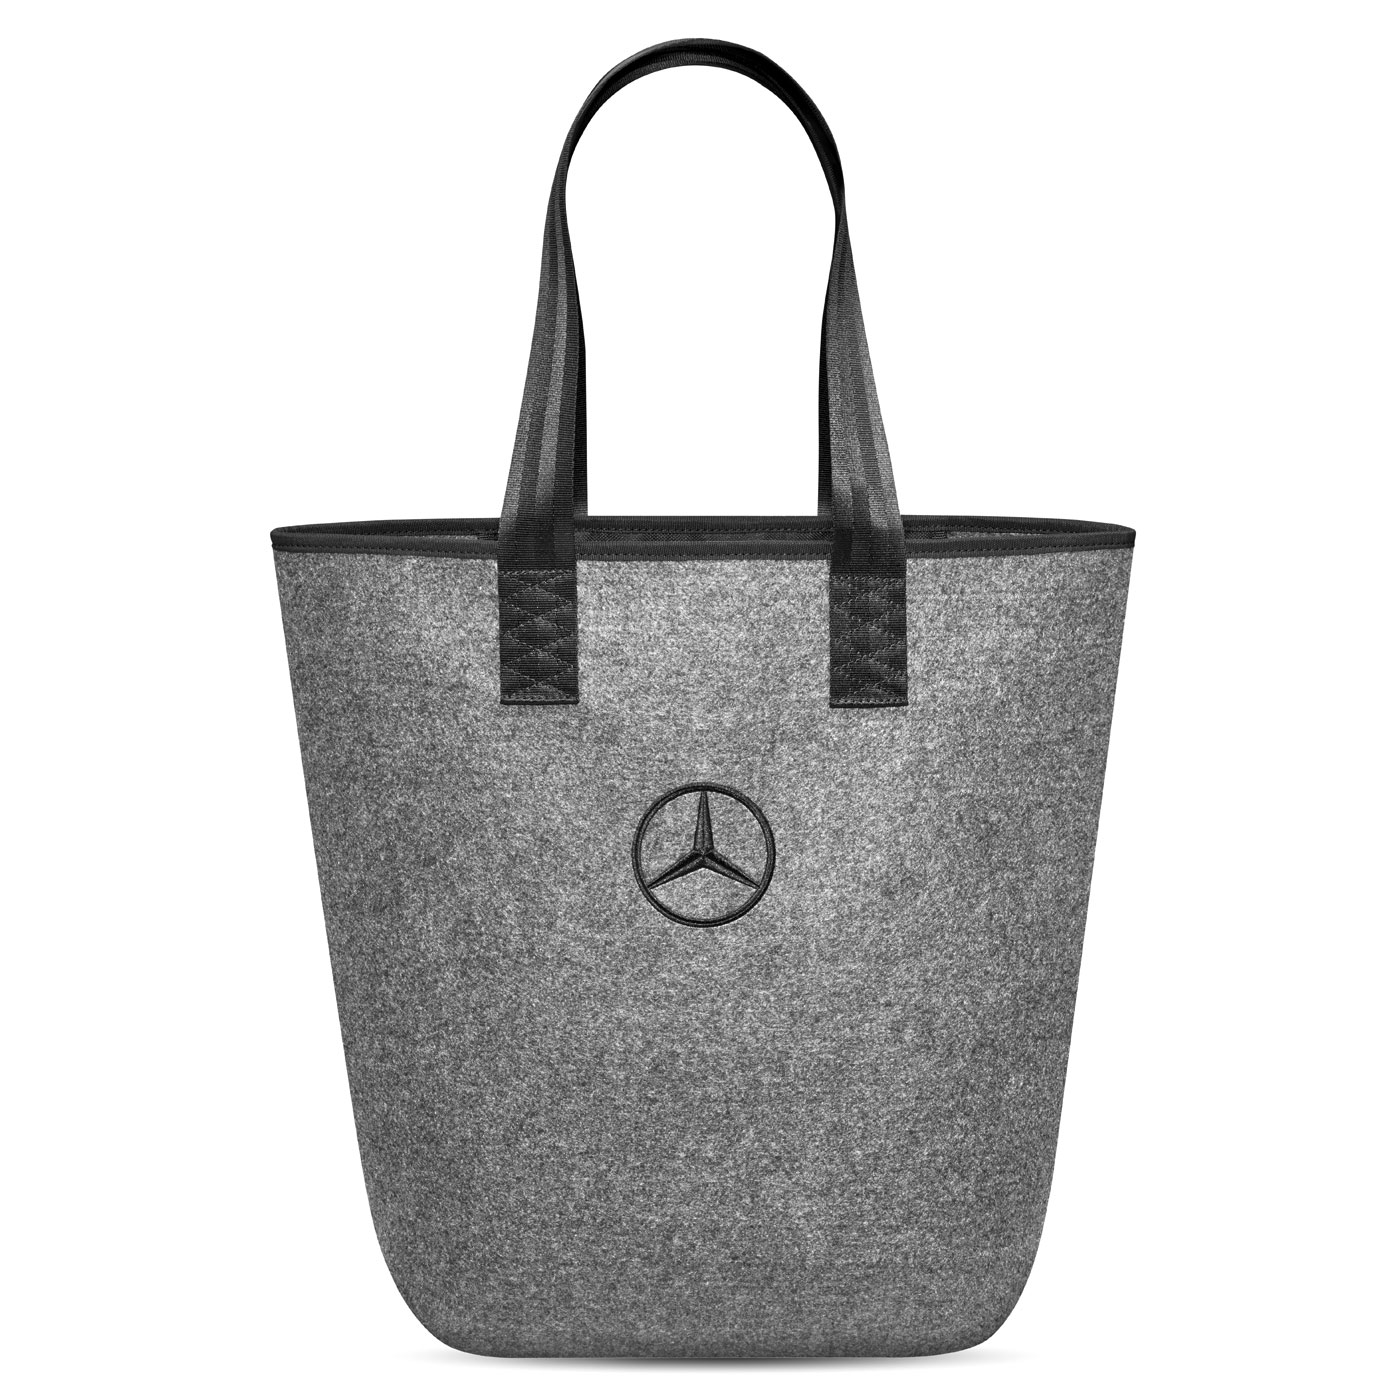 Tote Bag  Mercedes-Benz Lifestyle Collection